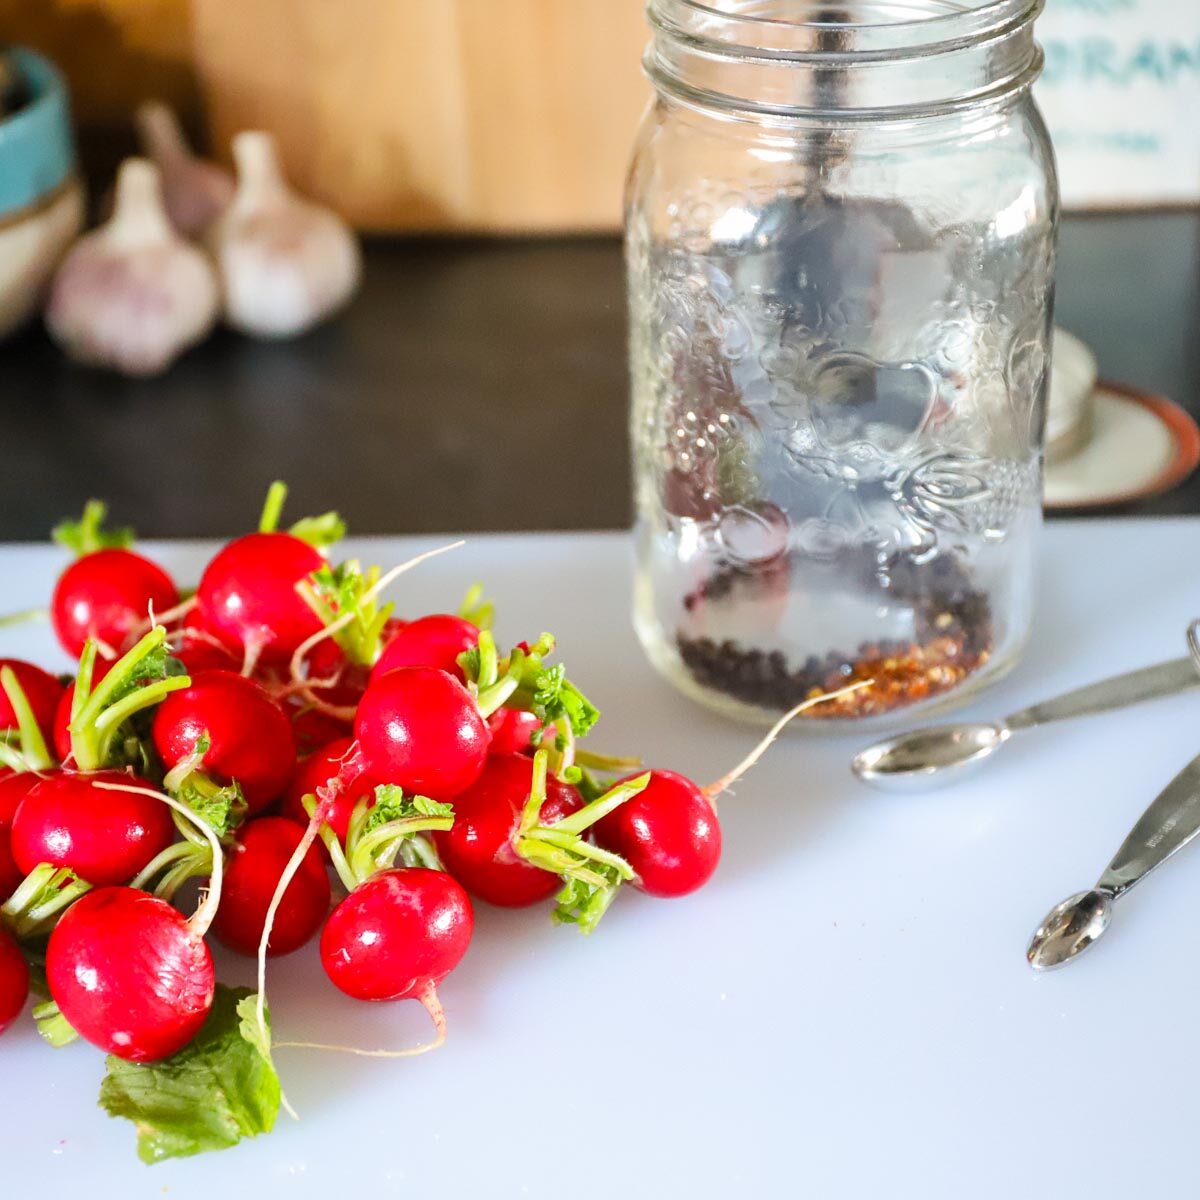 Wet washed radishes on a cutting board beside a wide mouth quart mason jar that has peppercorns and chili flakes in it.